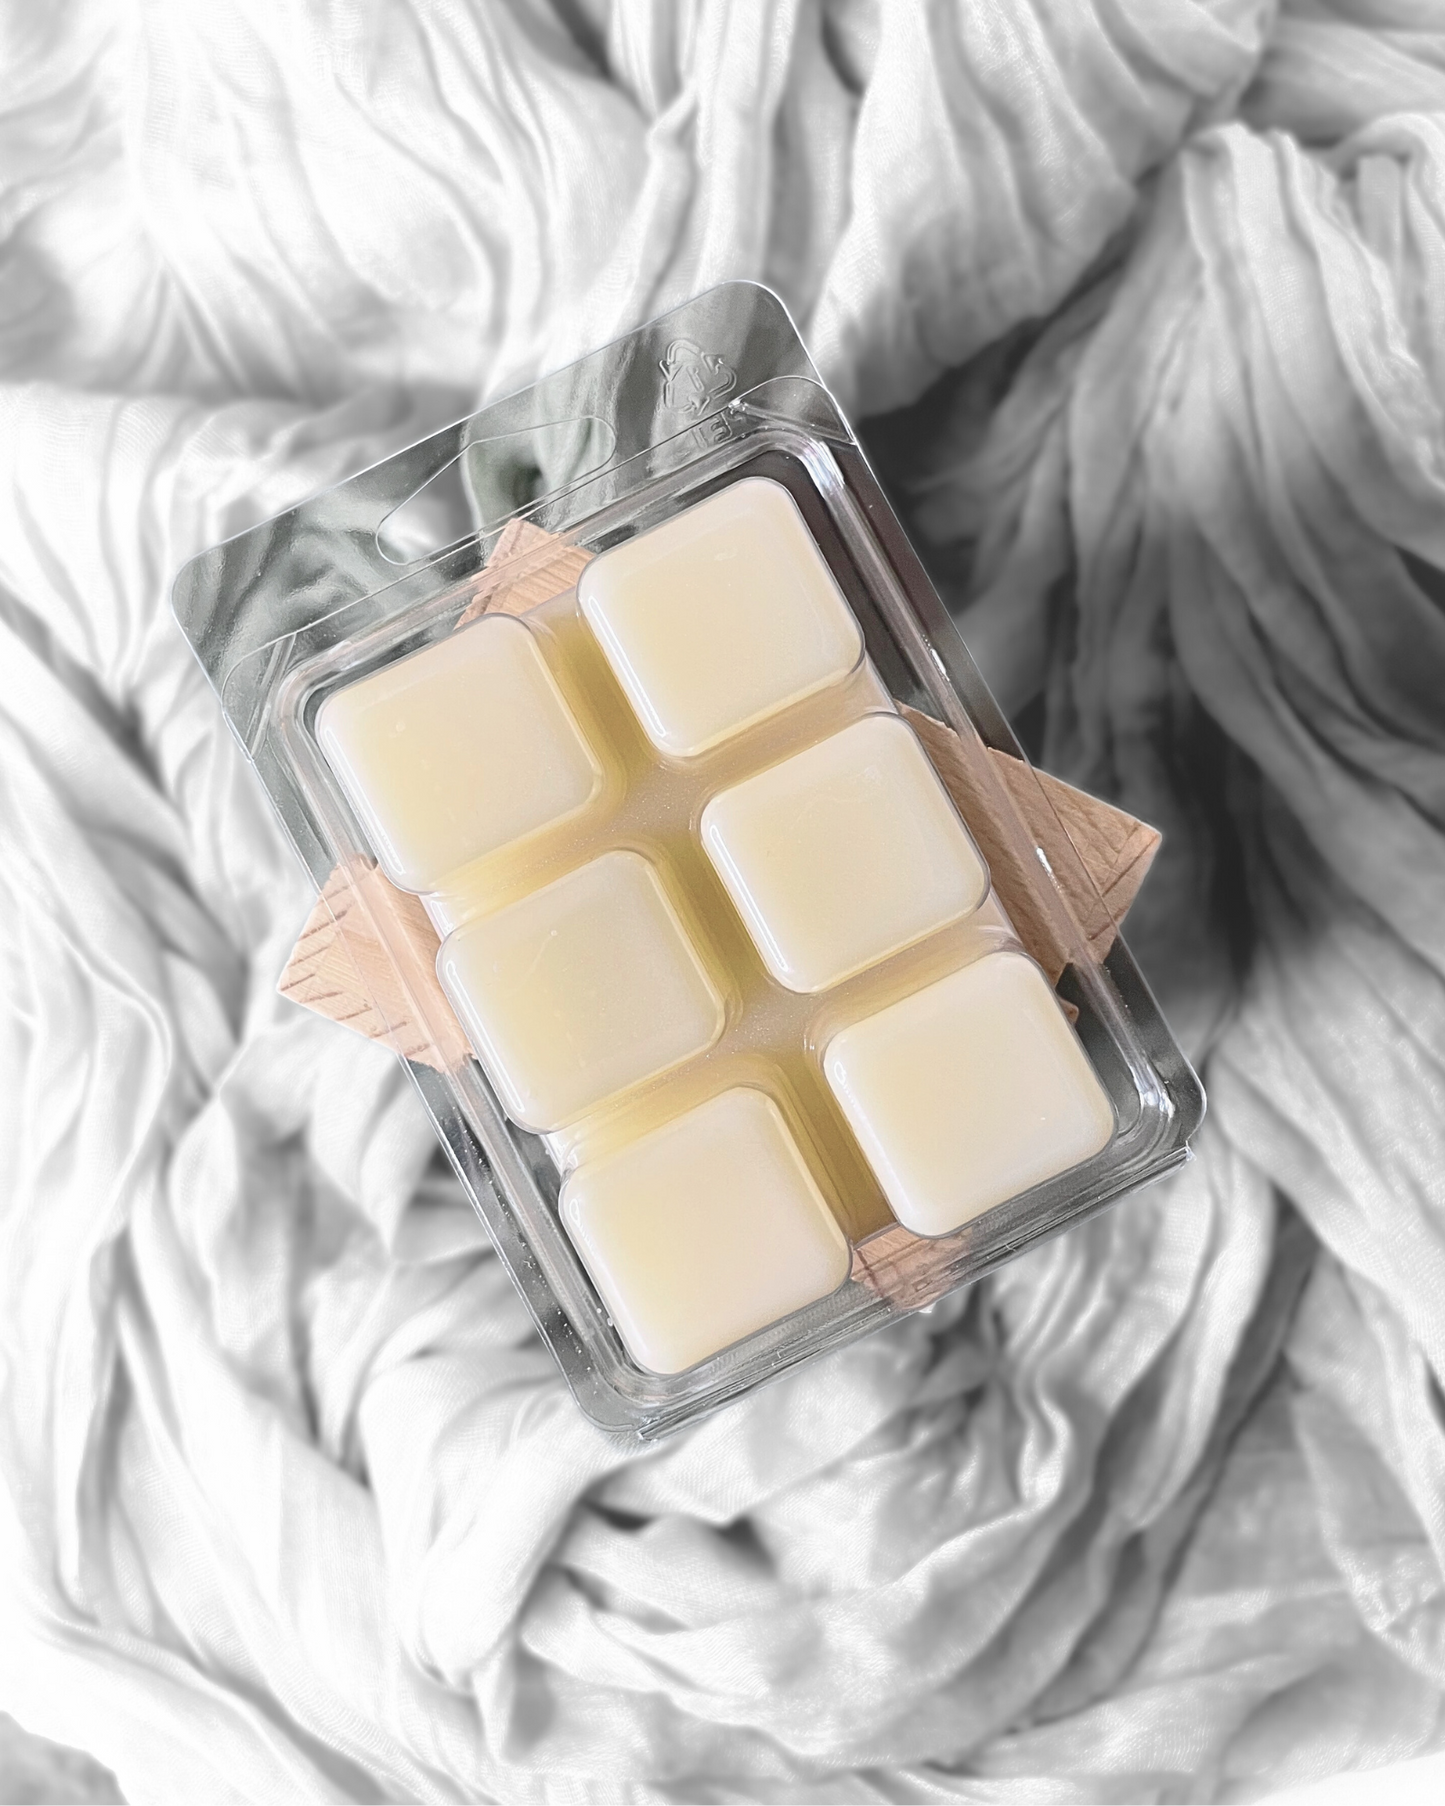 Vanilla Dream Soy Wax Melts, a fragrance that transcends the ordinary! Unlike the conventional vanilla scents, the Vanilla Dream Soy Wax Melts offer a luxurious, dreamy aroma that captivates the senses. The rich, toasted vanilla scents blended with sweet geranium florals and a hint of musk creates a unique olfactory experience that is beyond ordinary. Get ready to indulge in this sophisticated fragrance that is sure to enchant you. www.farmhousecharmcandles.com